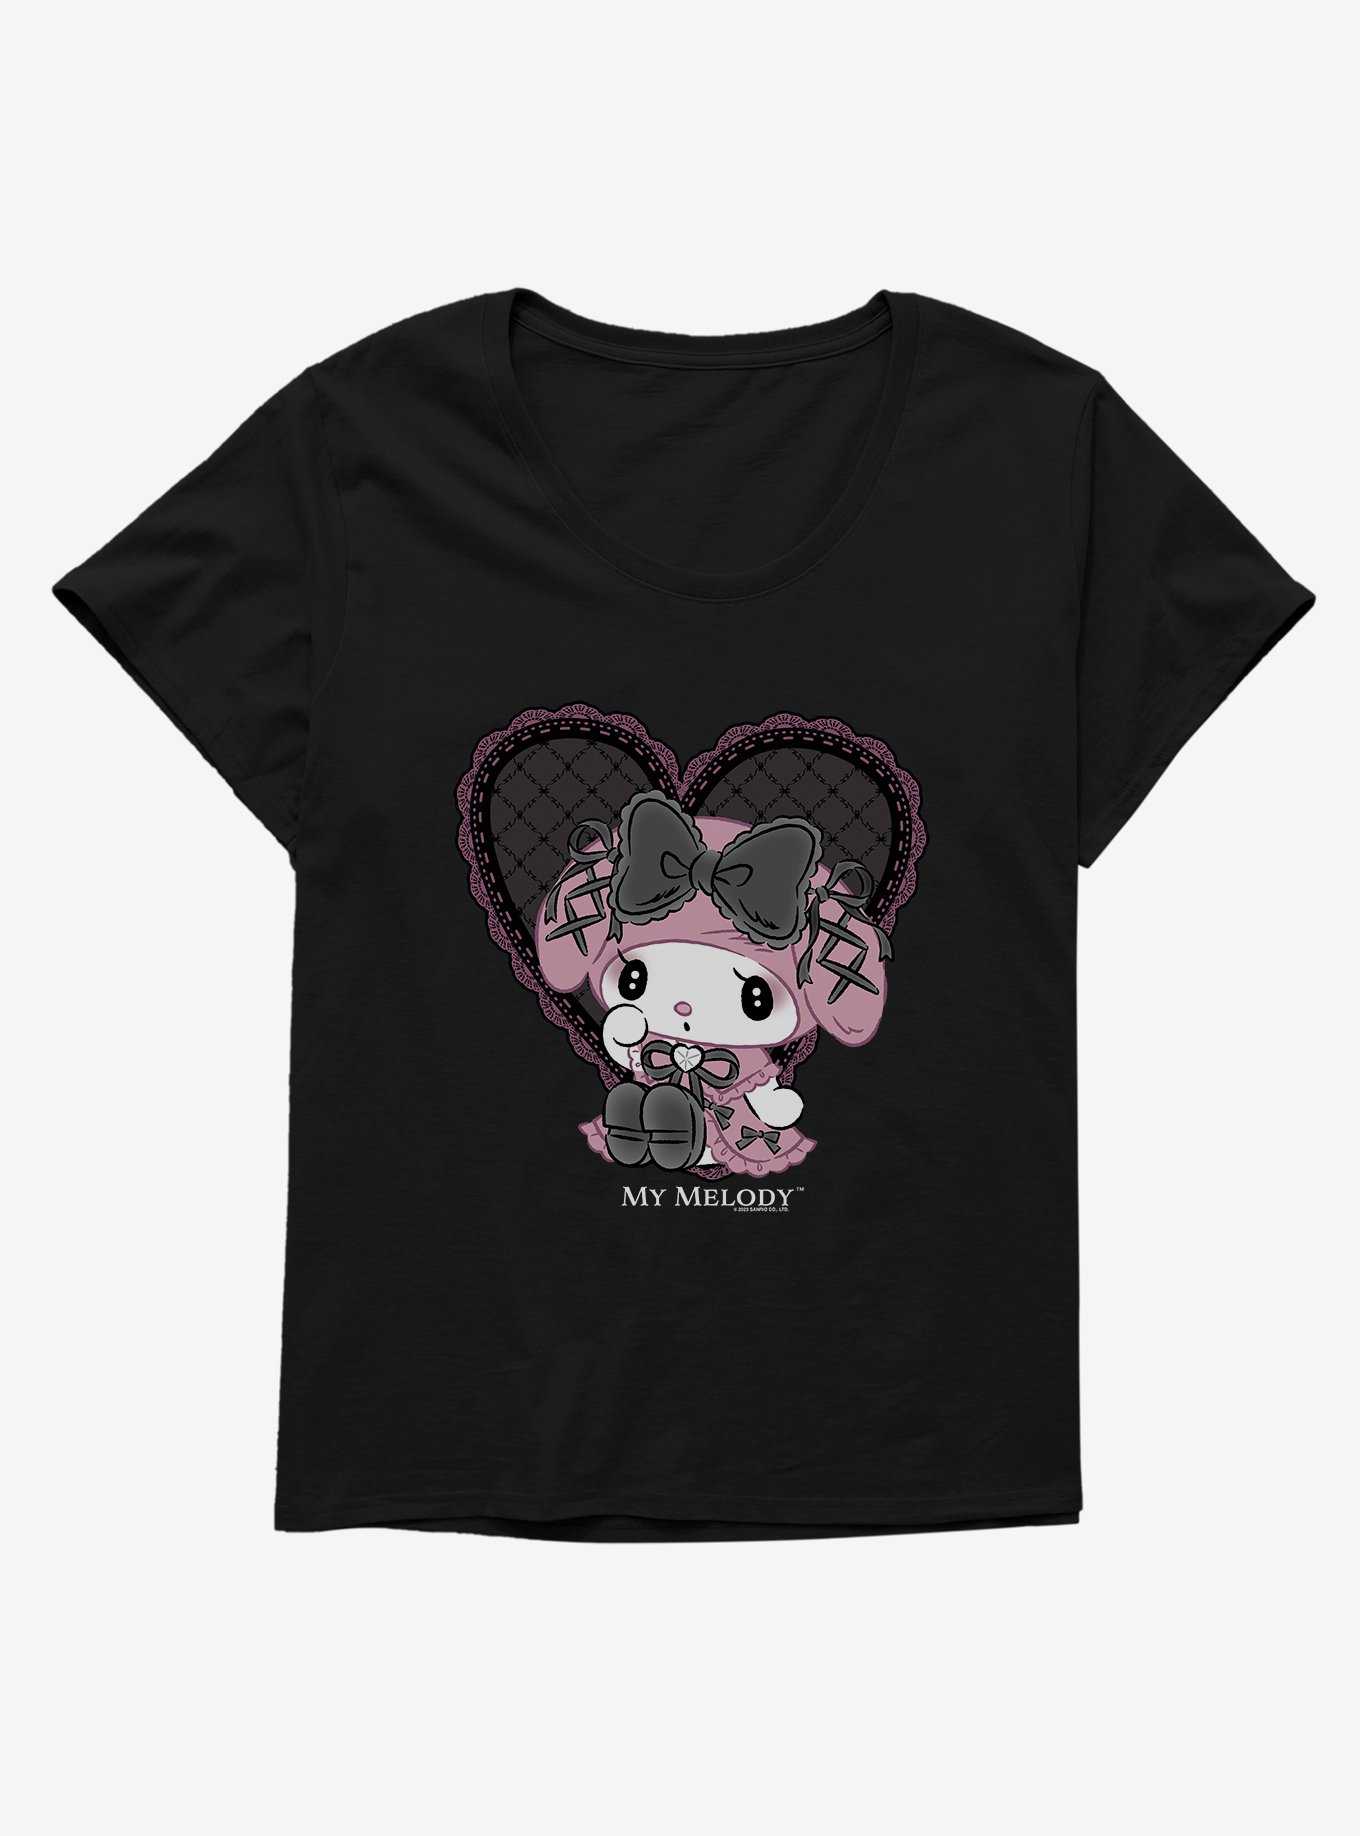 My Melody Lacey Black Heart Girls T-Shirt Plus Size, , hi-res